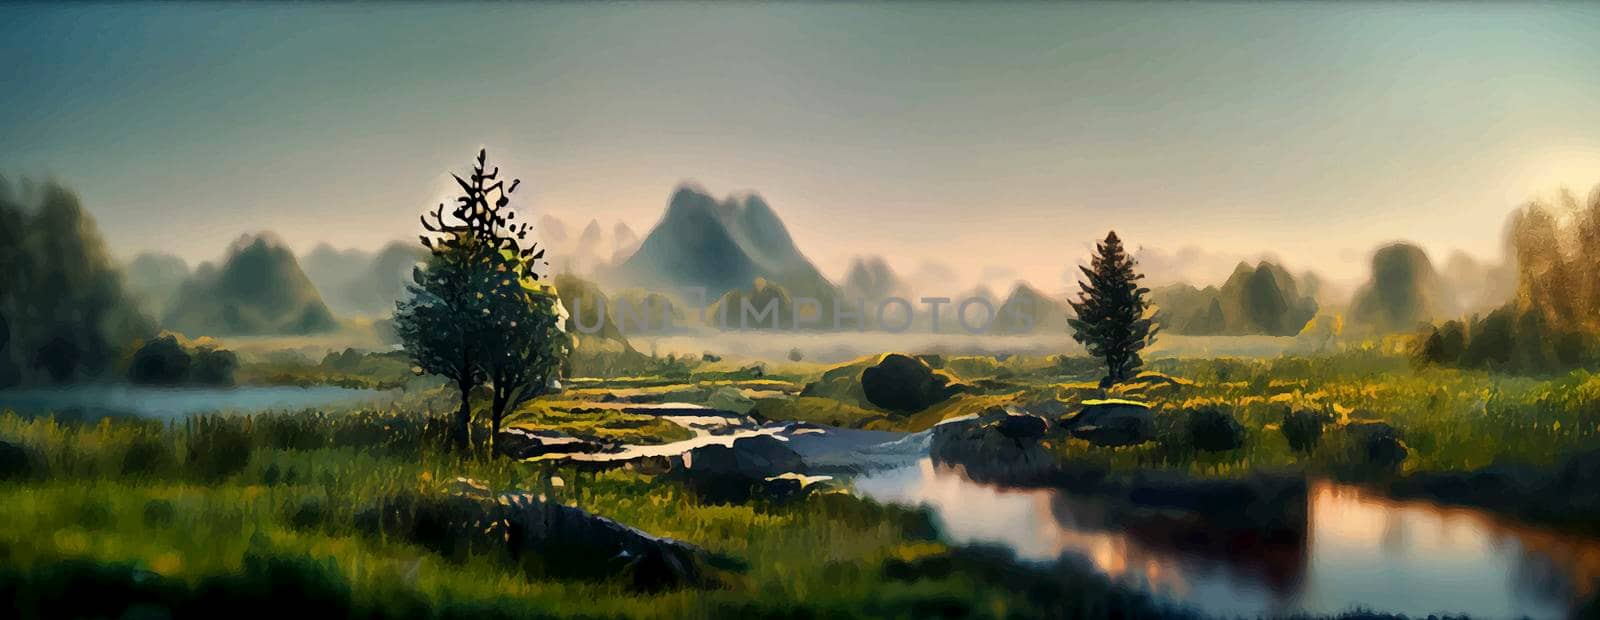 panoramic Illustration of peaceful landscape with a natural setting, cinematic and beautiful landscape illustration. by JpRamos